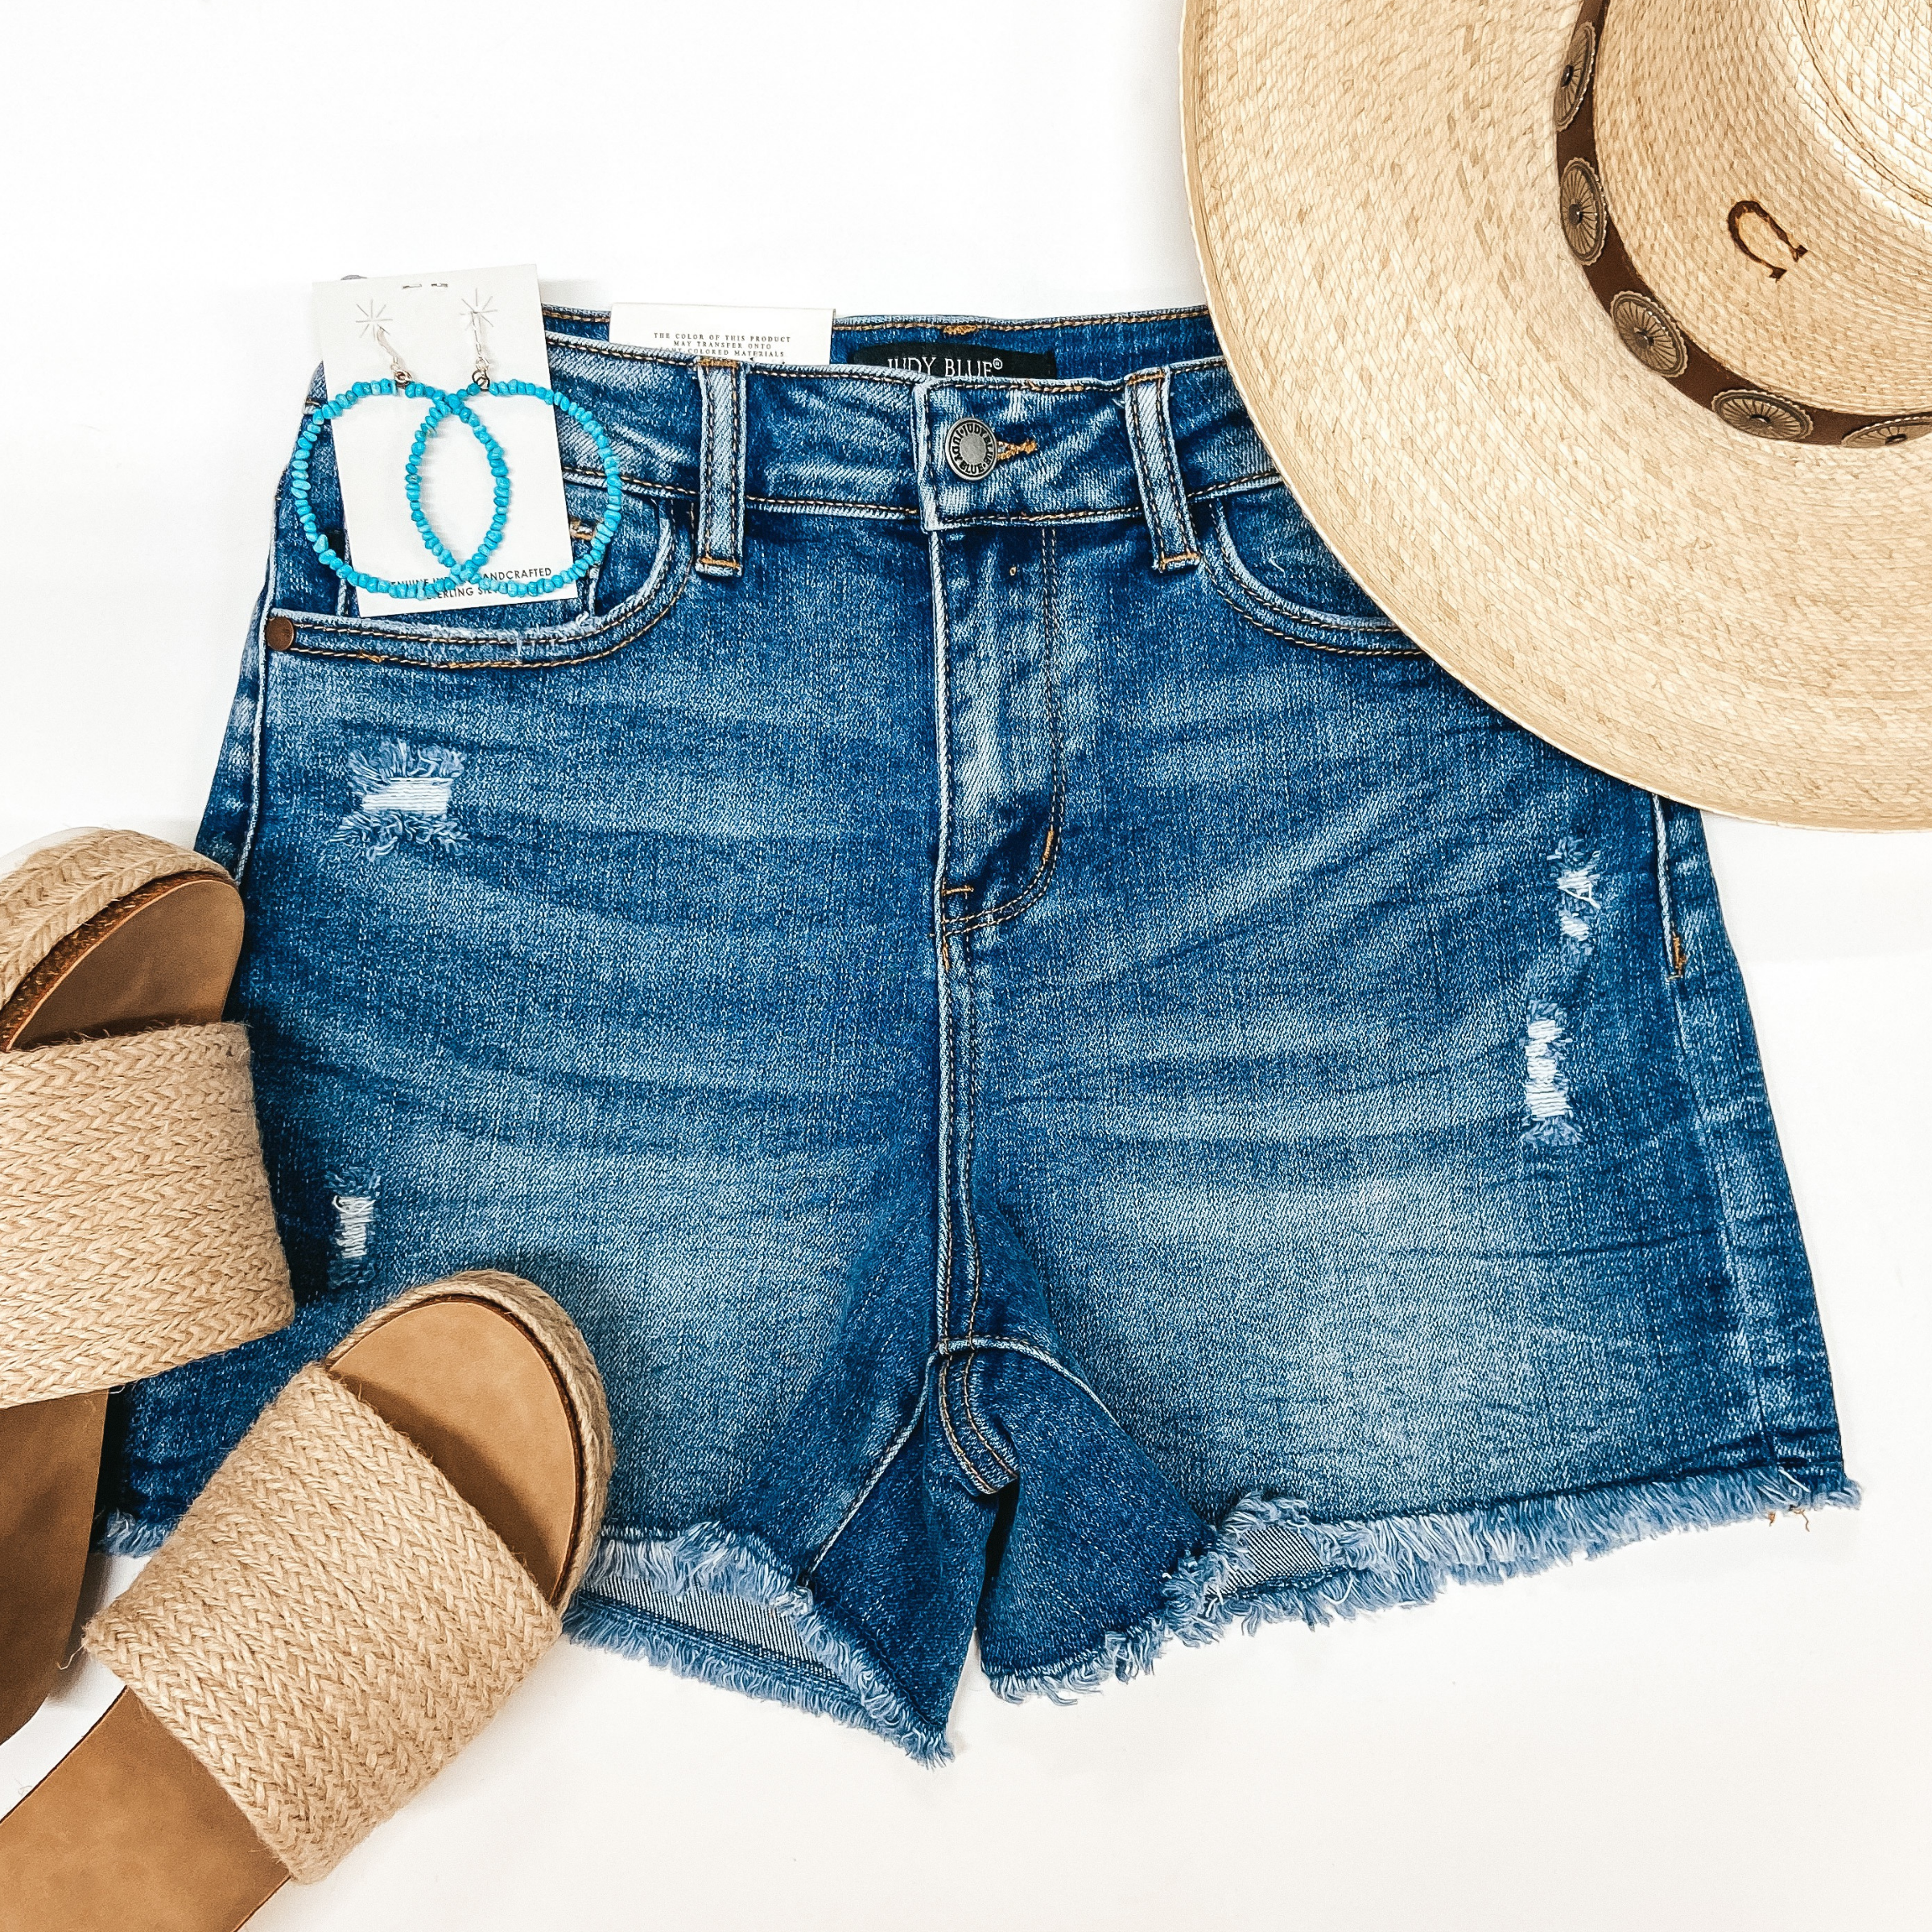 A pair of dark wash cut off shorts. Pictured on white background with straw hat, turquoise earrings, and a pair of platform sandals.